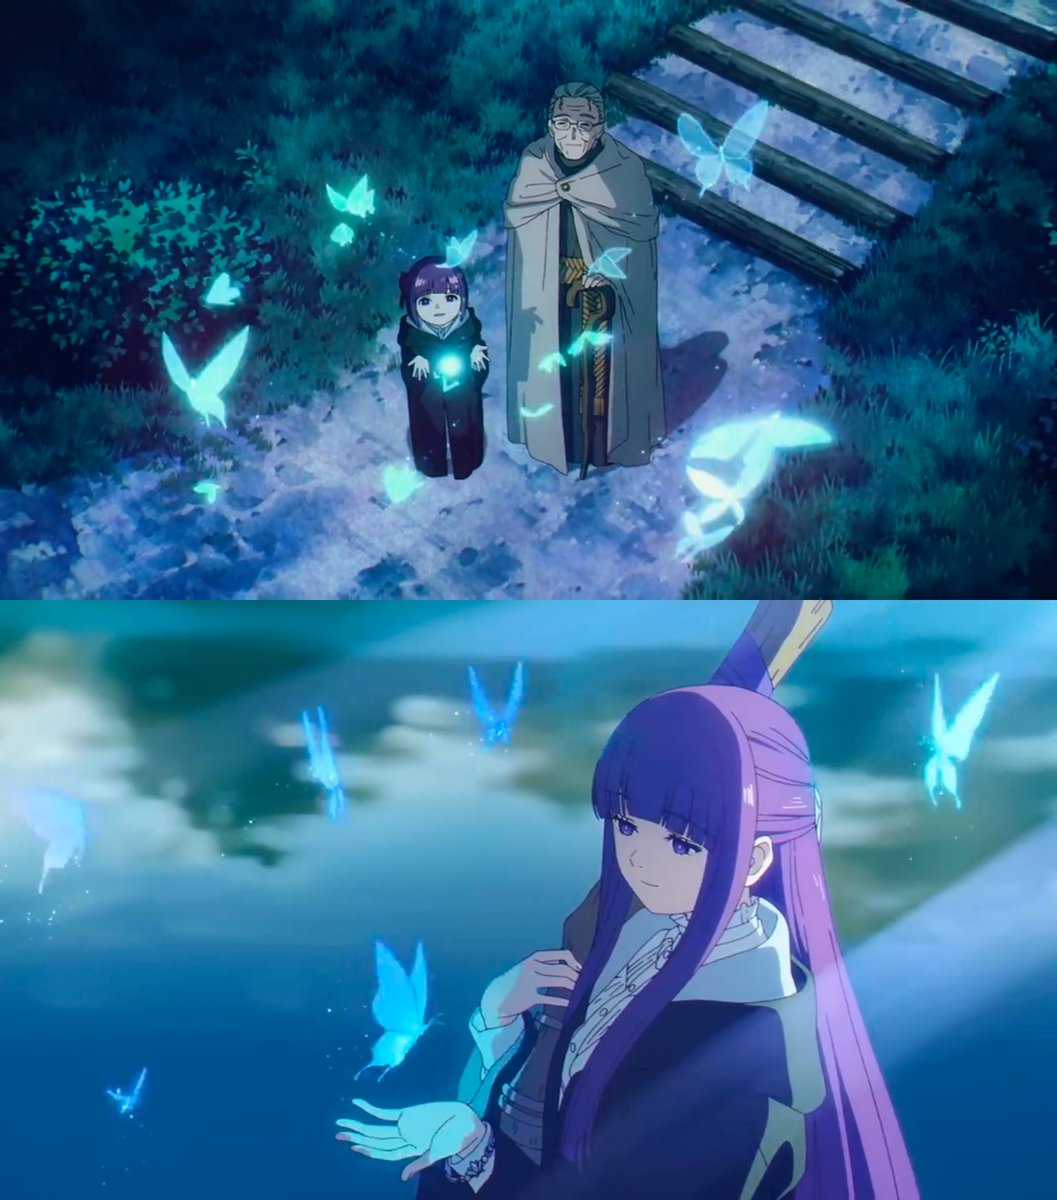 One of Fern's ultimate spells is foreshadowed twice in the animation